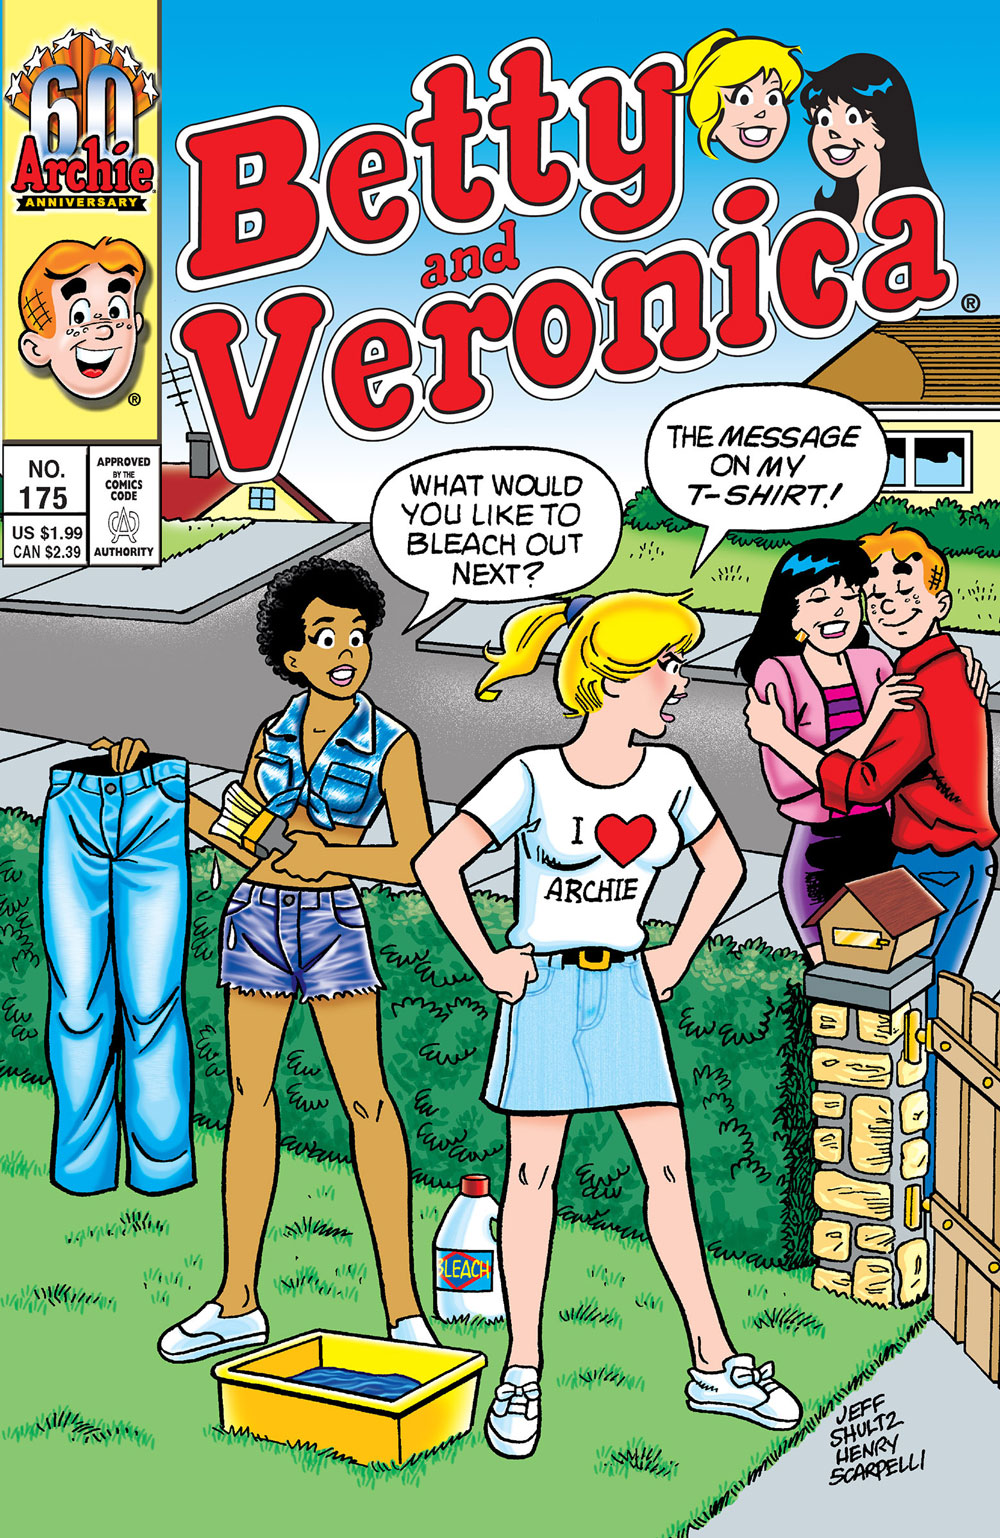 Archie and Veronica cuddle next to Betty's house. Betty and Nancy are bleaching their blue jeans in the yard. Nancy asks Betty what she wants to bleach out next and Betty says her t-shirt, which says I Love Archie on it.